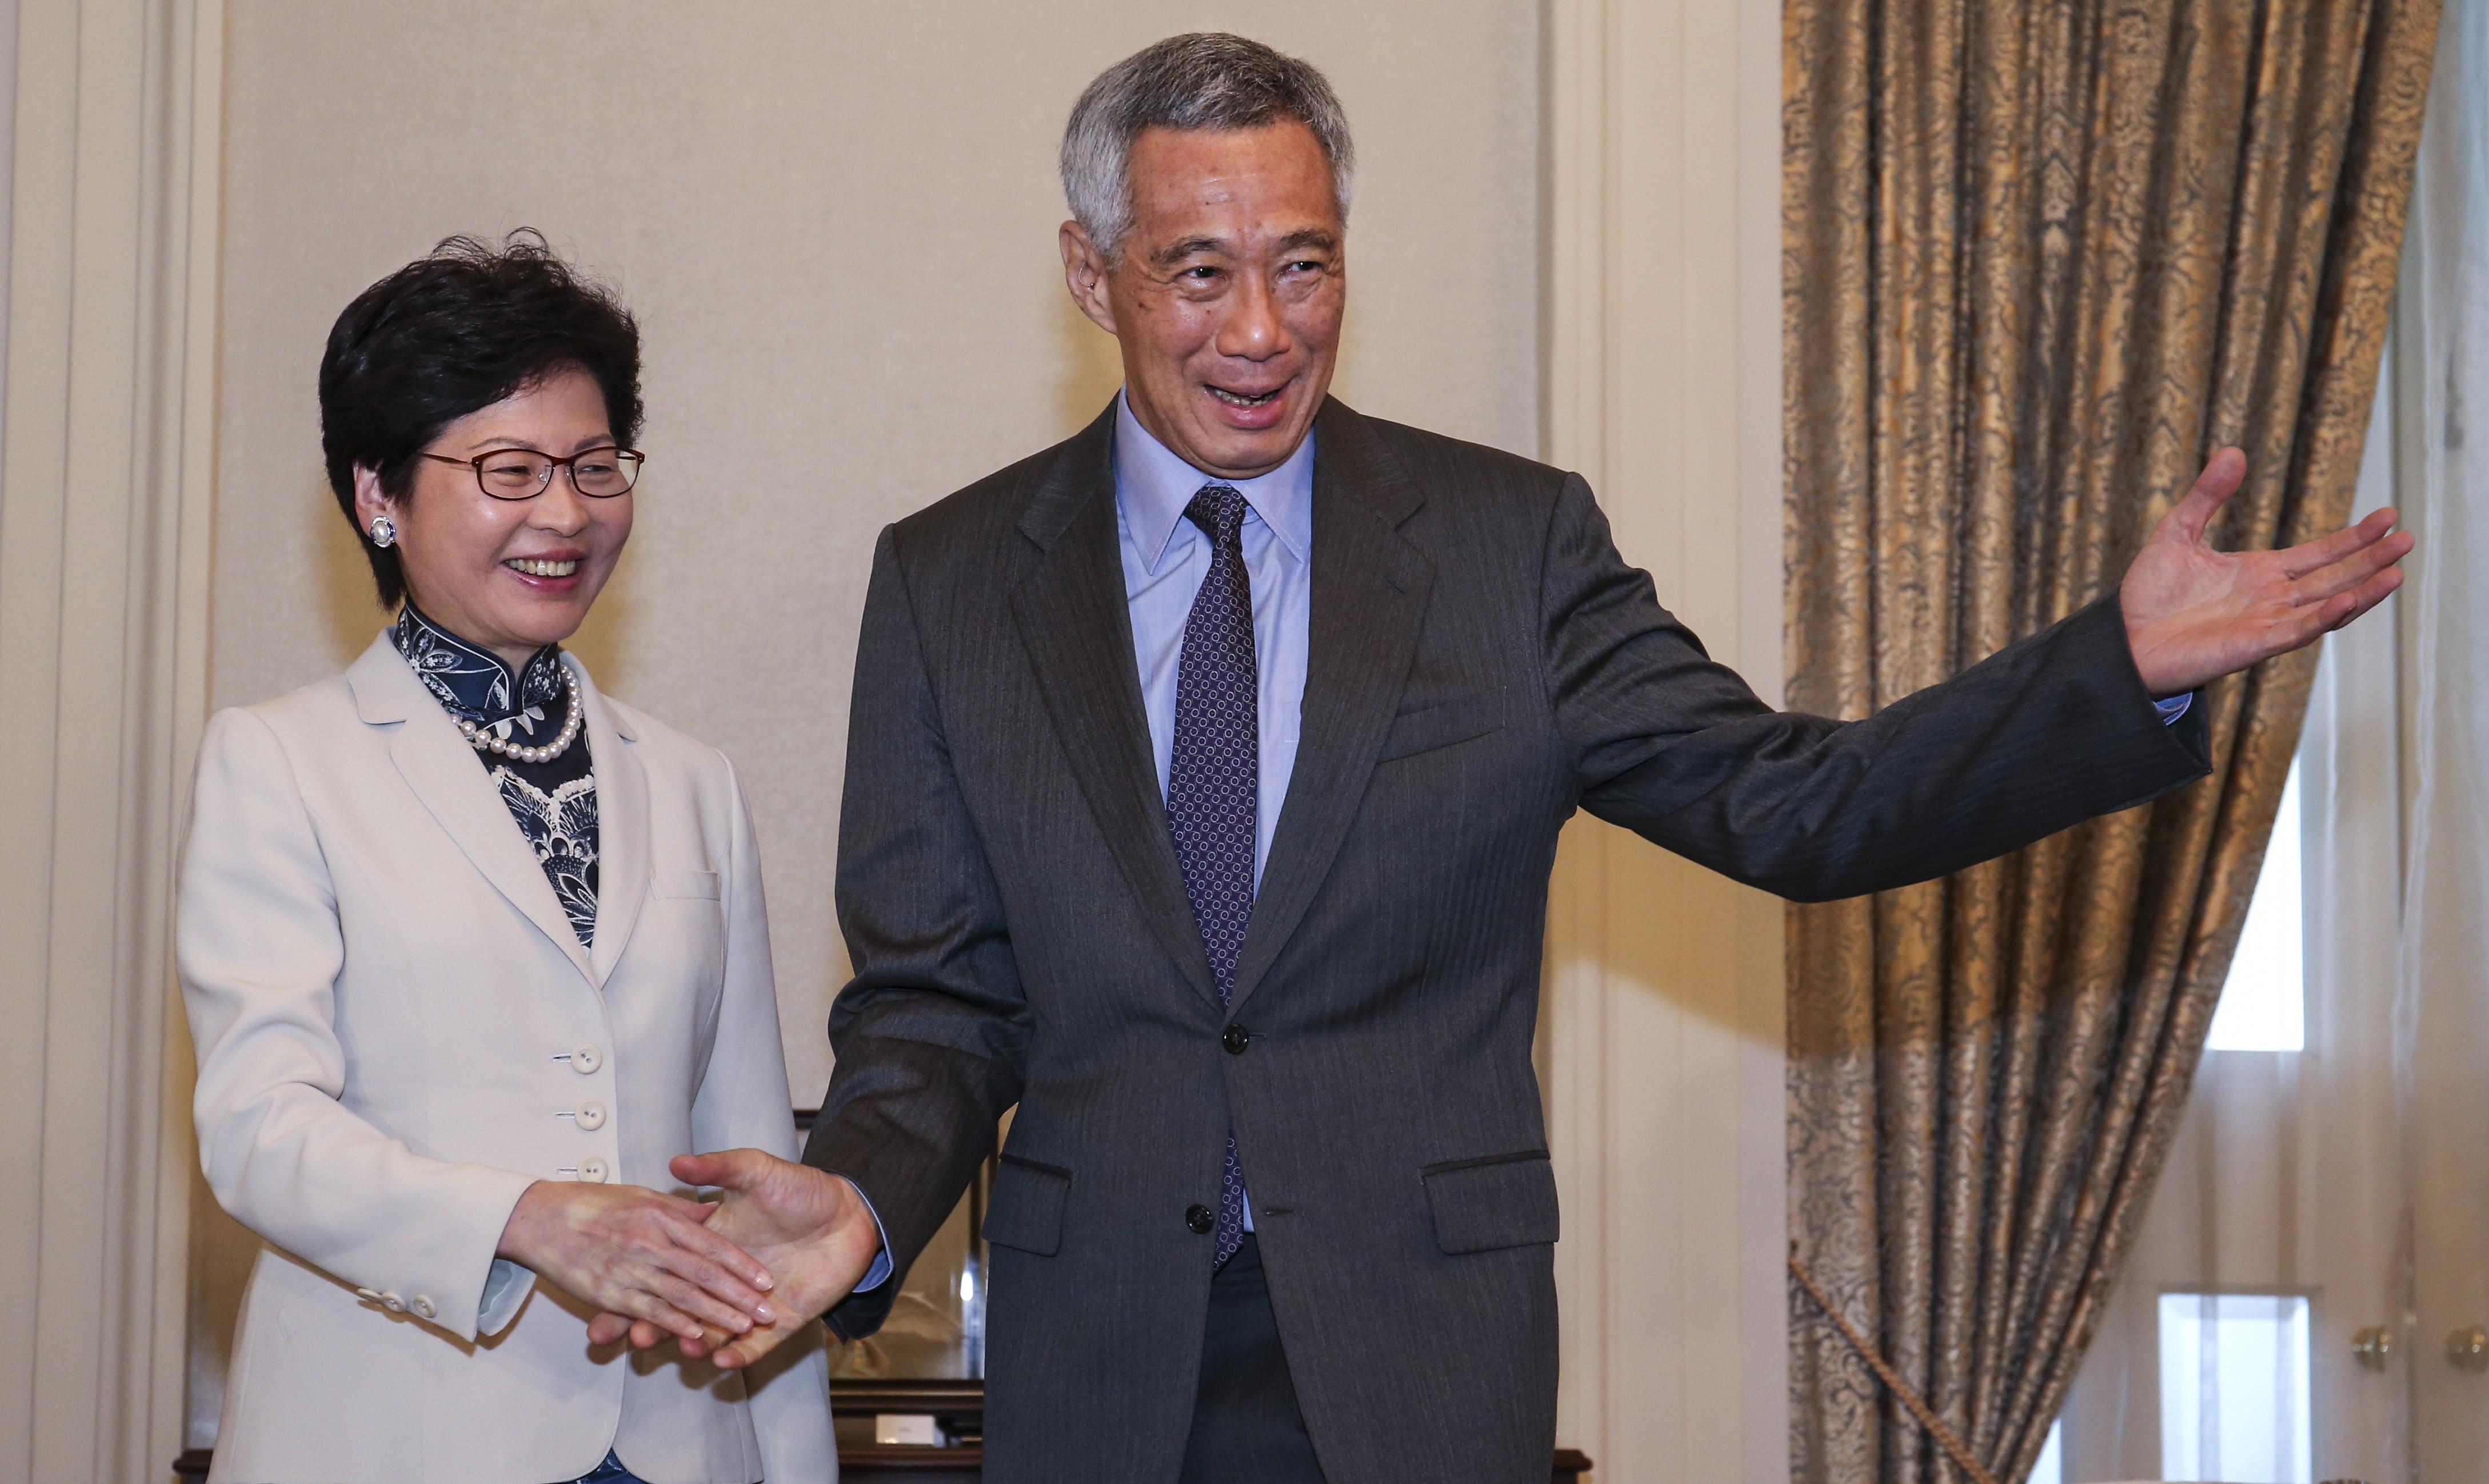 Hong Kong Chief Executive Carrie Lam meets Prime Minister Lee Hsien Loong of Singapore on August 3. Photo: K. Y. Cheng